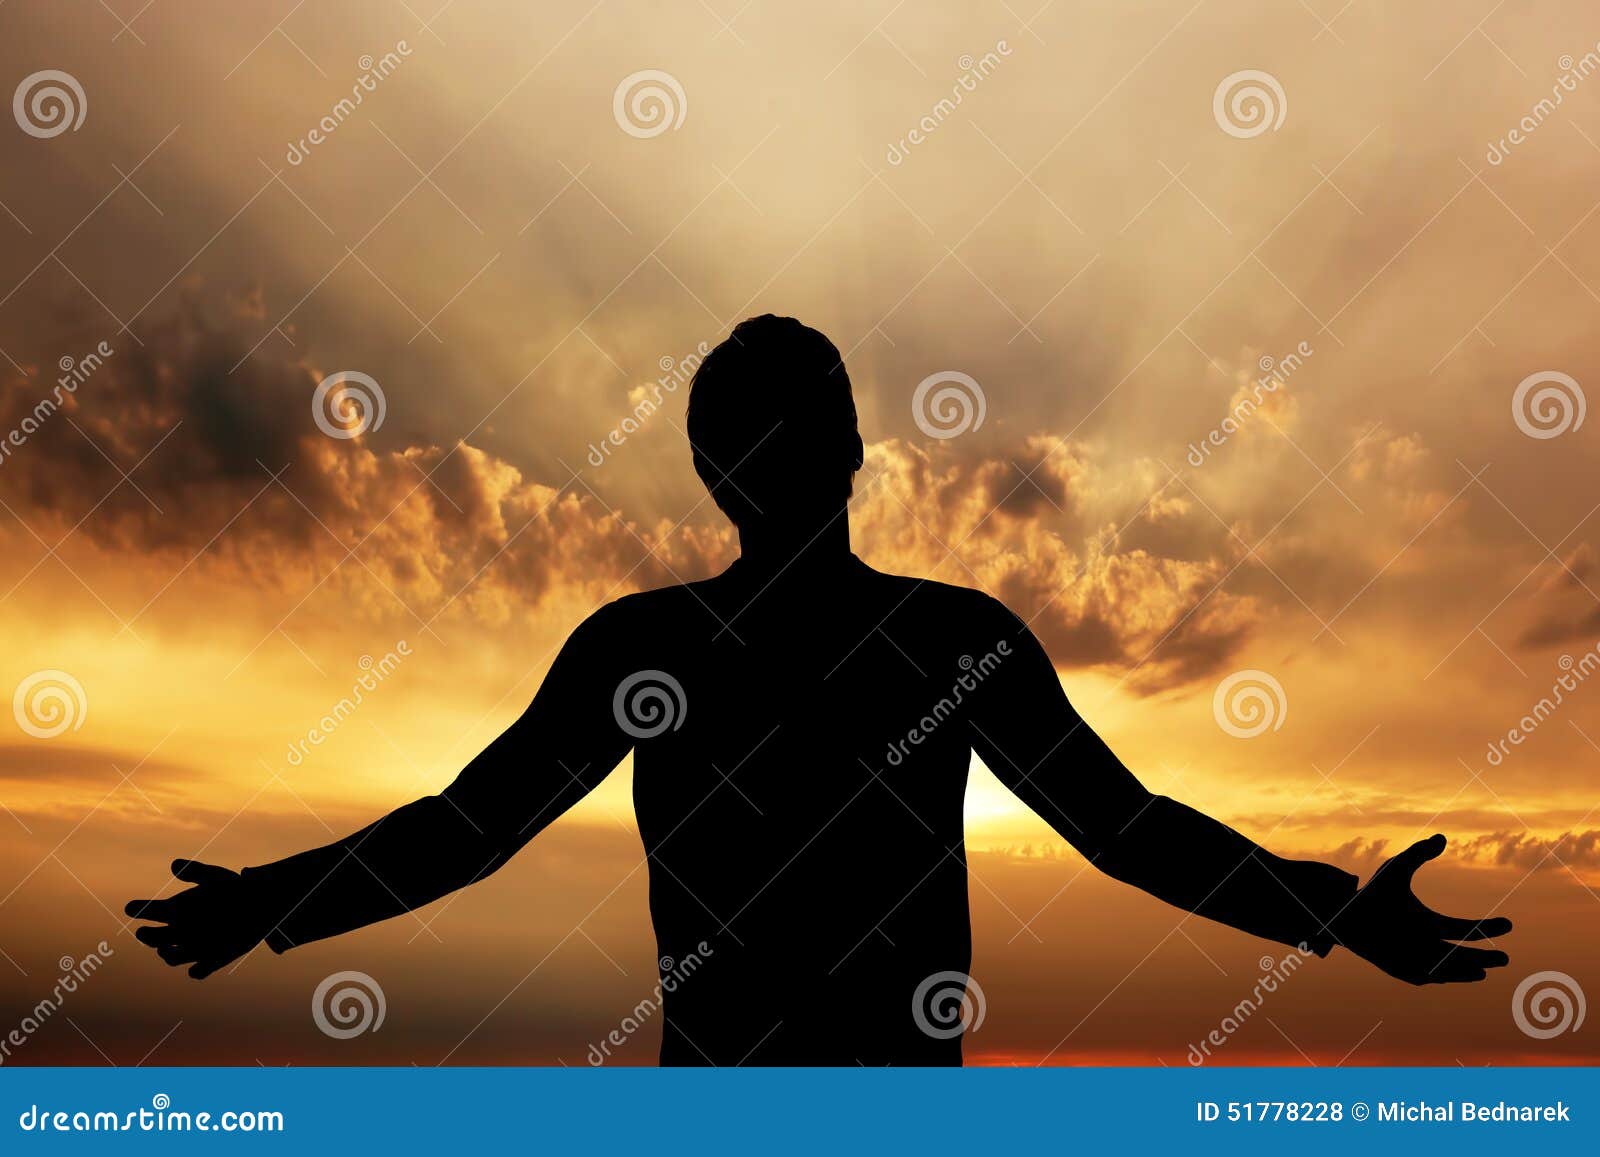 man praying, meditating in harmony and peace at sunset